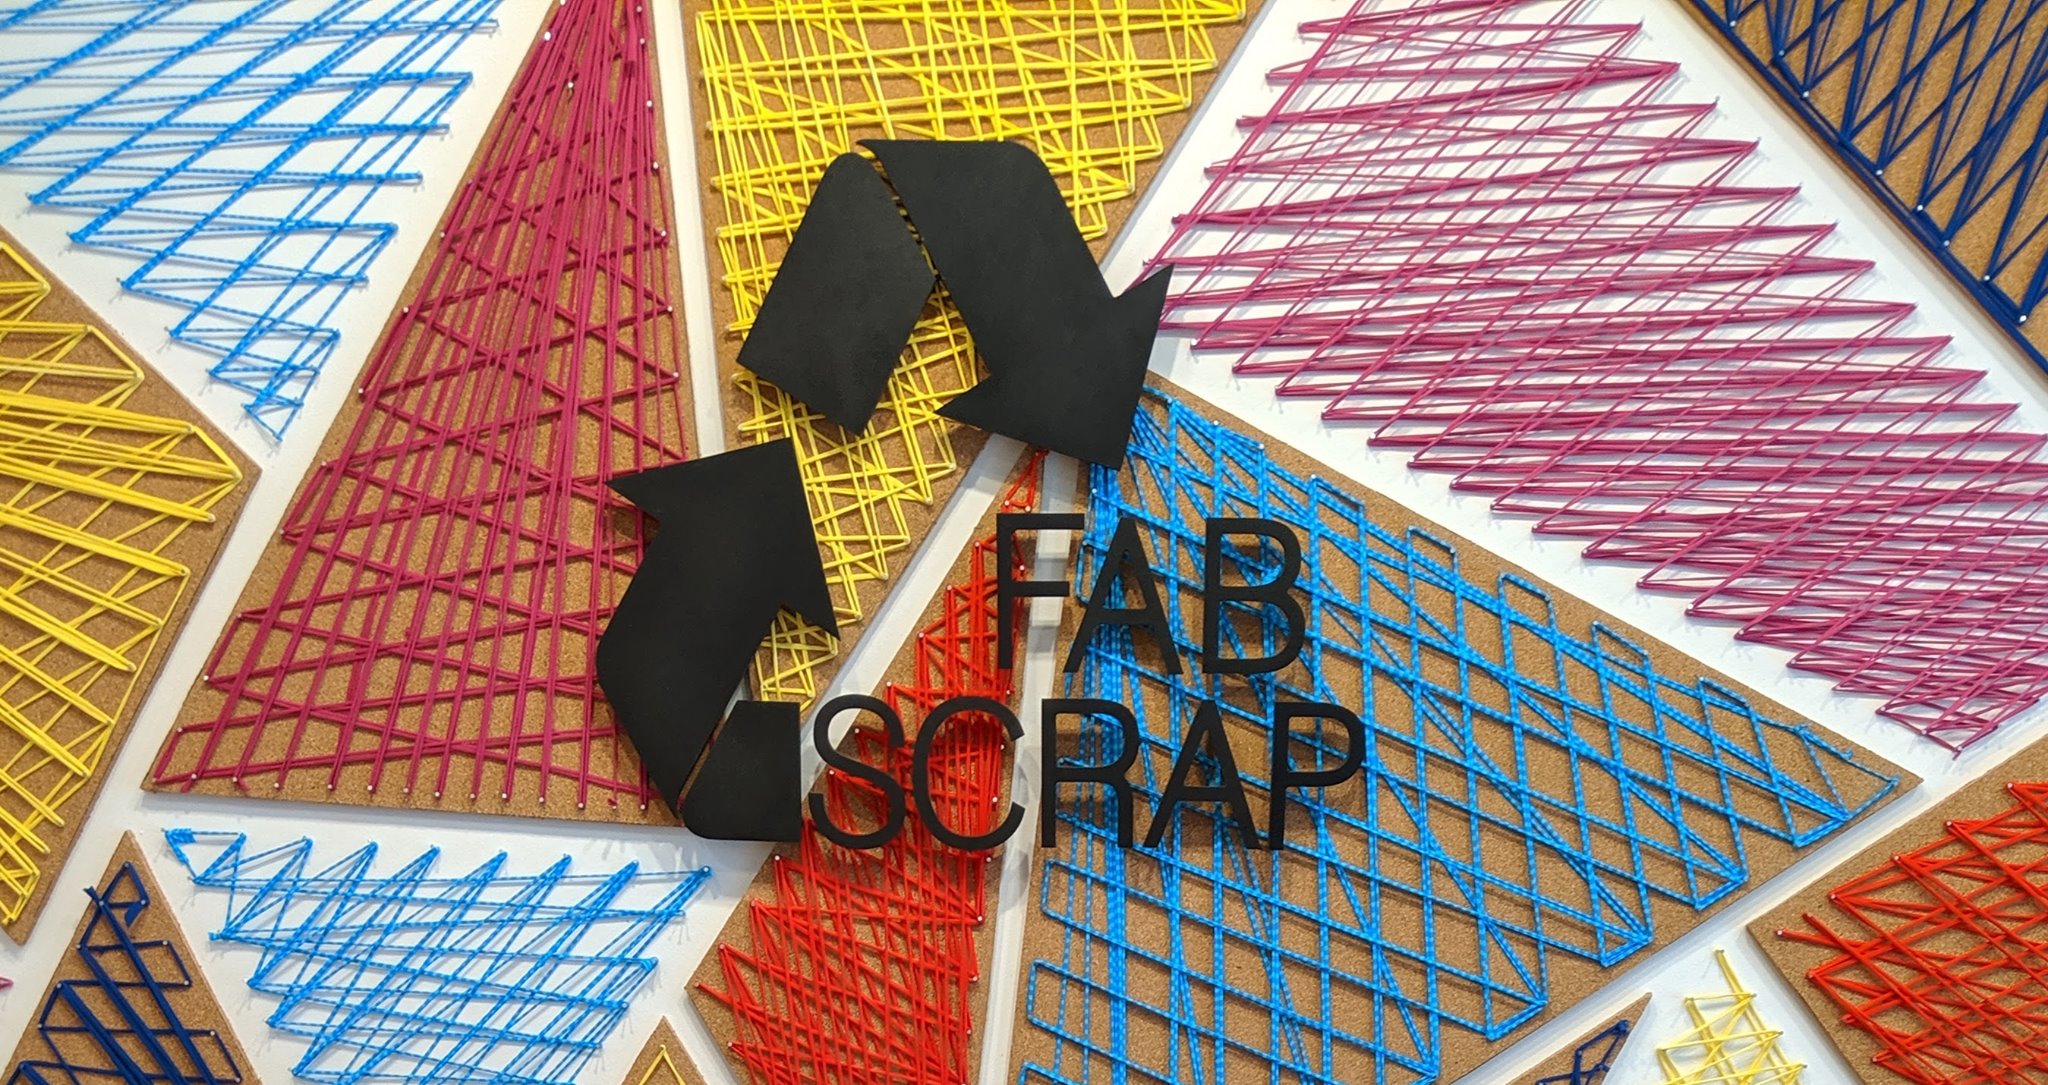 FABSCRAP: Philly’s Textile Recycling Center